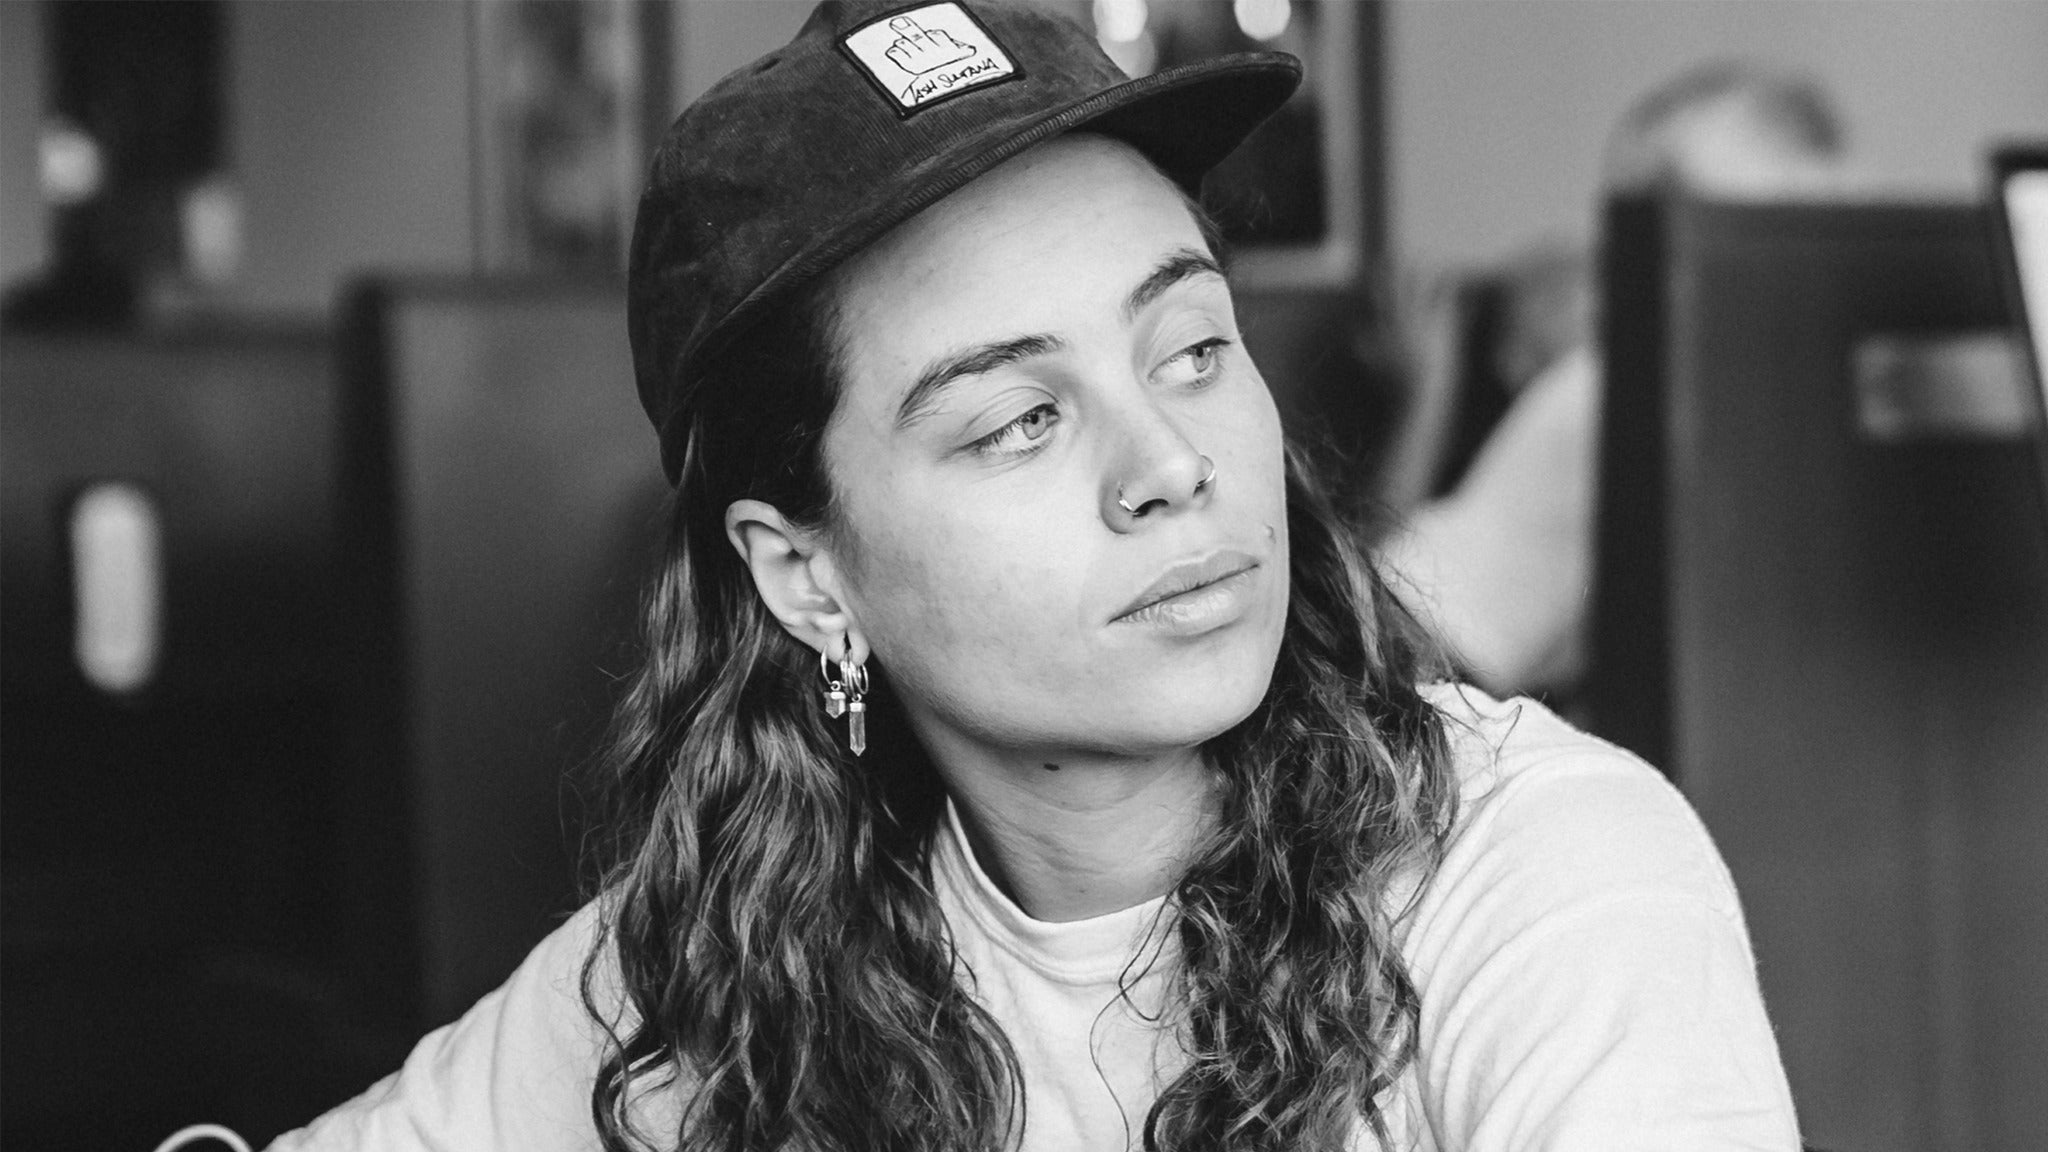 EVENT MOVED TO JACOB'S PAVILION: Tash Sultana in Cleveland promo photo for Spotify presale offer code